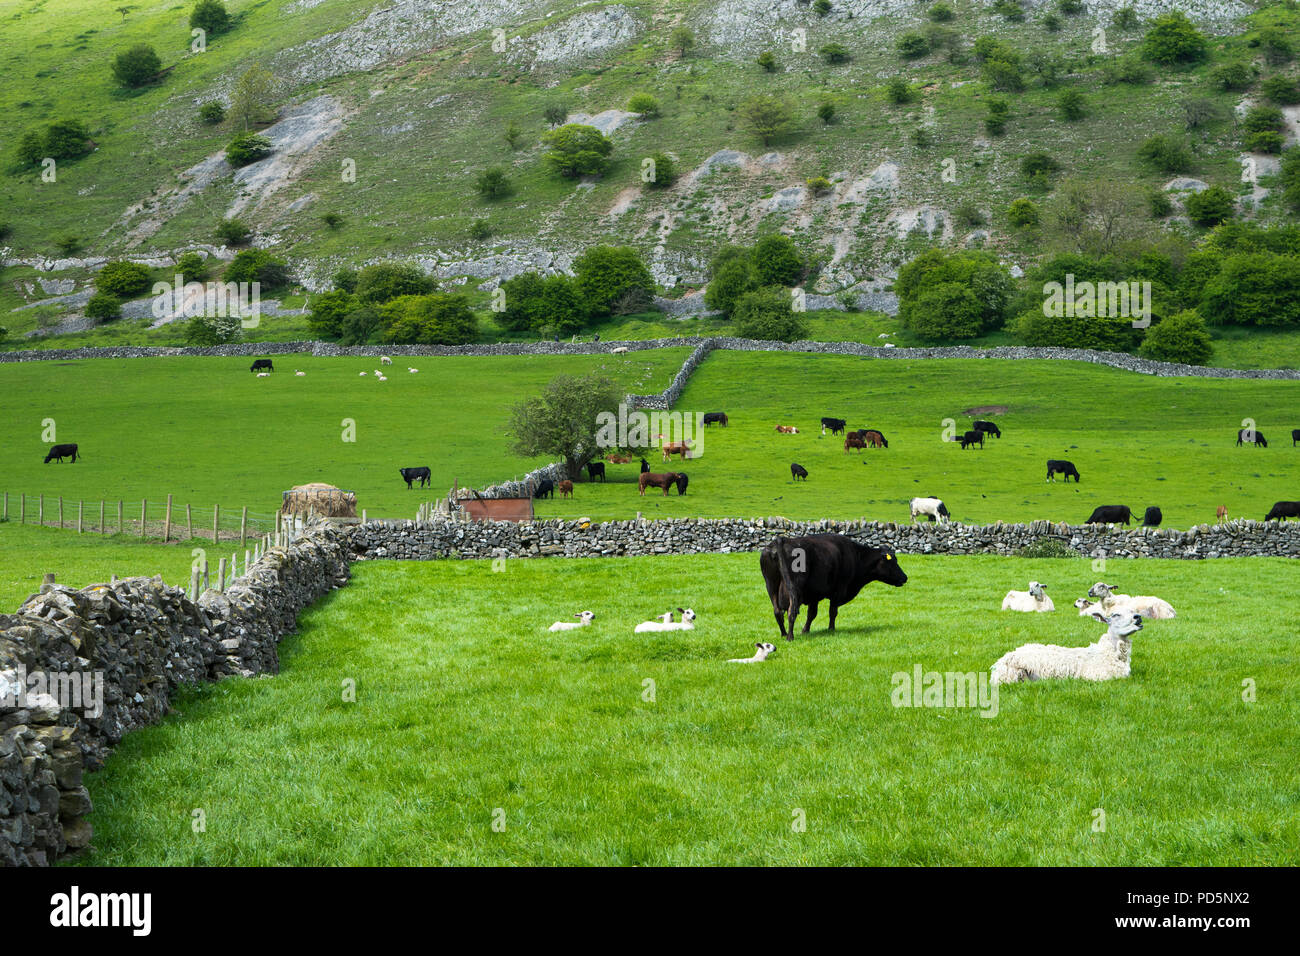 Country scene from Dovedale in the Peak District in Derbyshire, showing dry stone walls, cattle, sheep and moorland Stock Photo